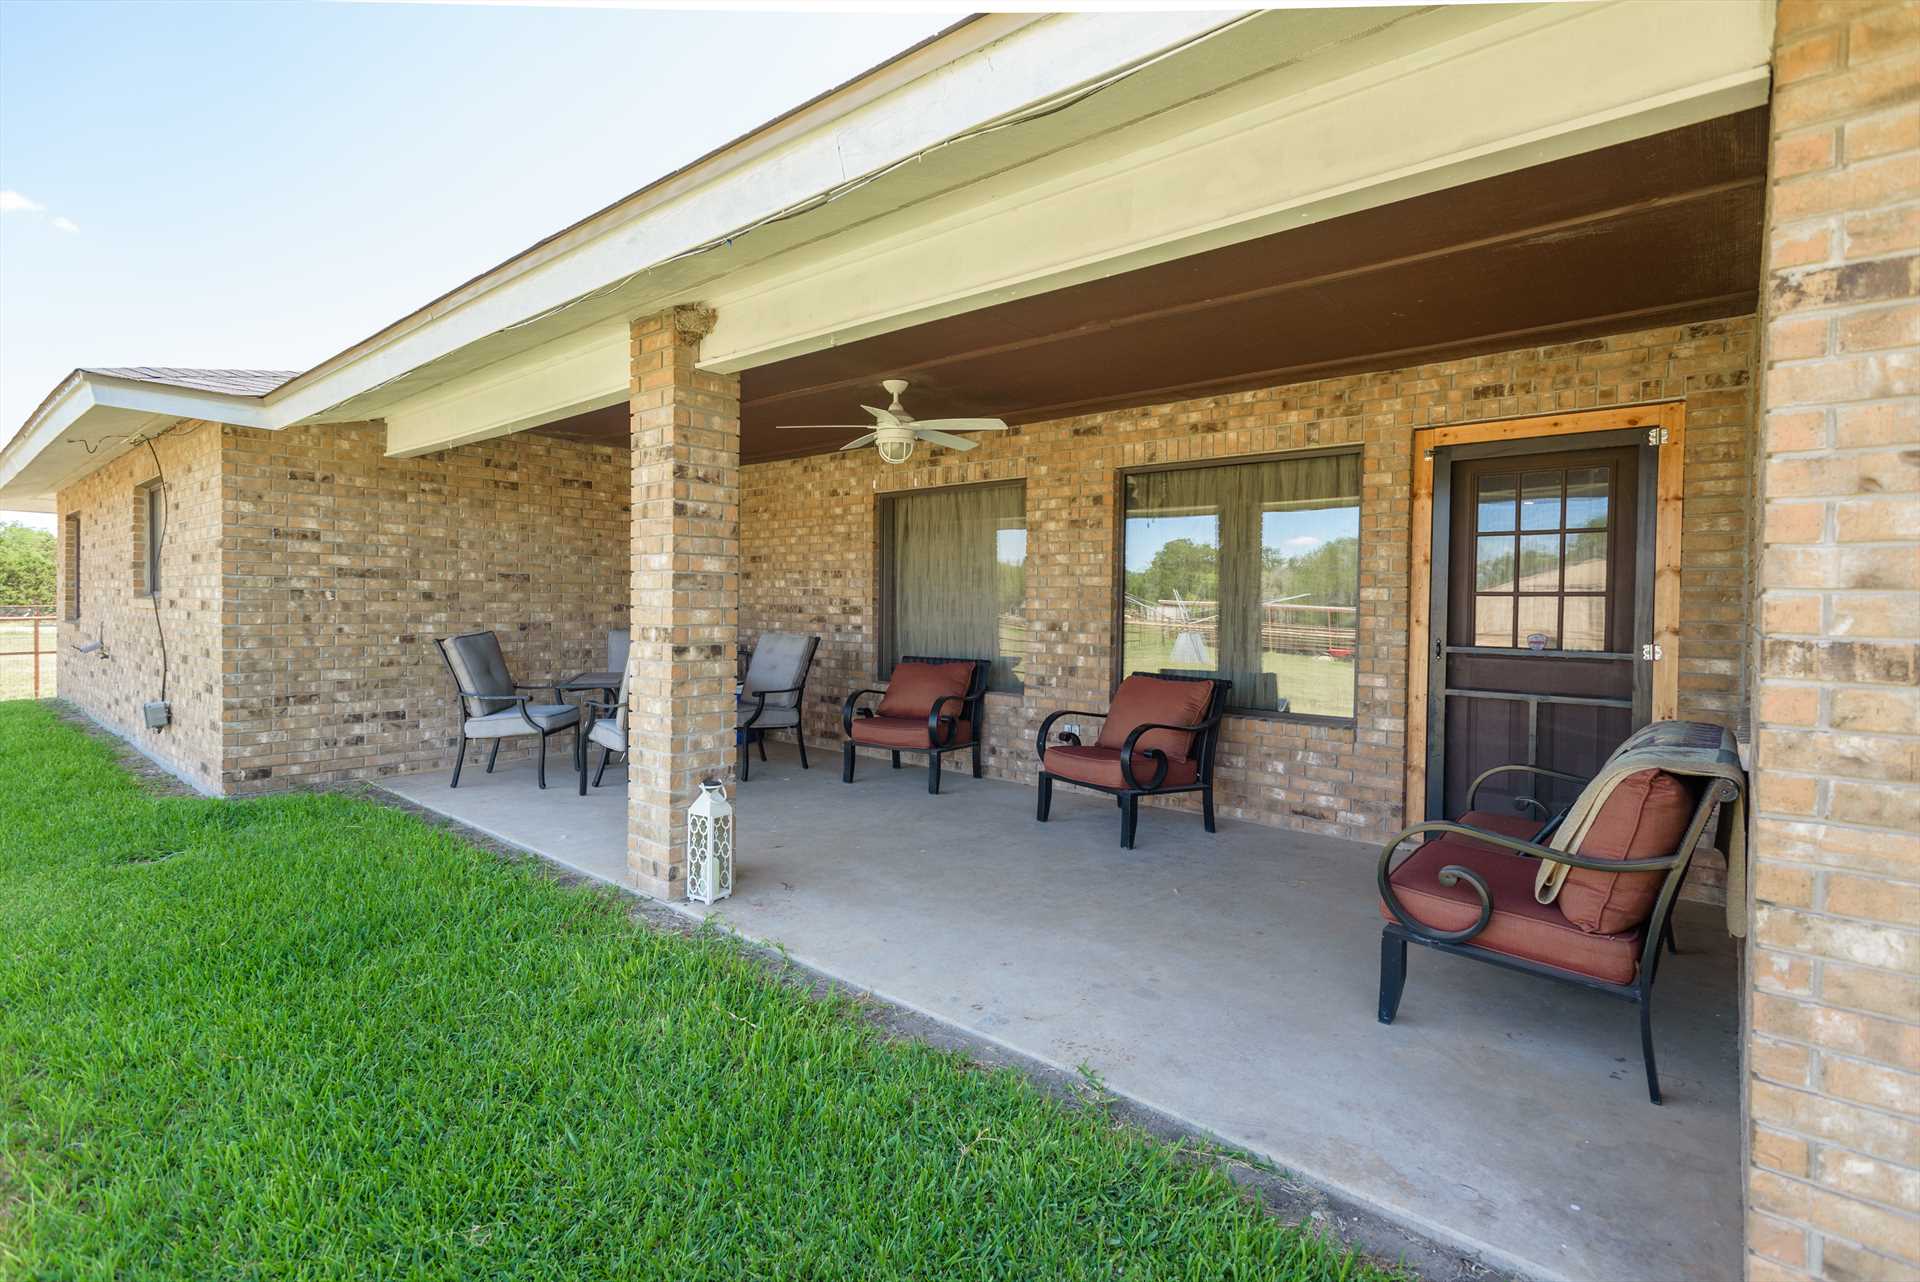                                                 Soft and comfy furniture on the shaded patio make it a great place to relax, chat, and take in the beautiful views!